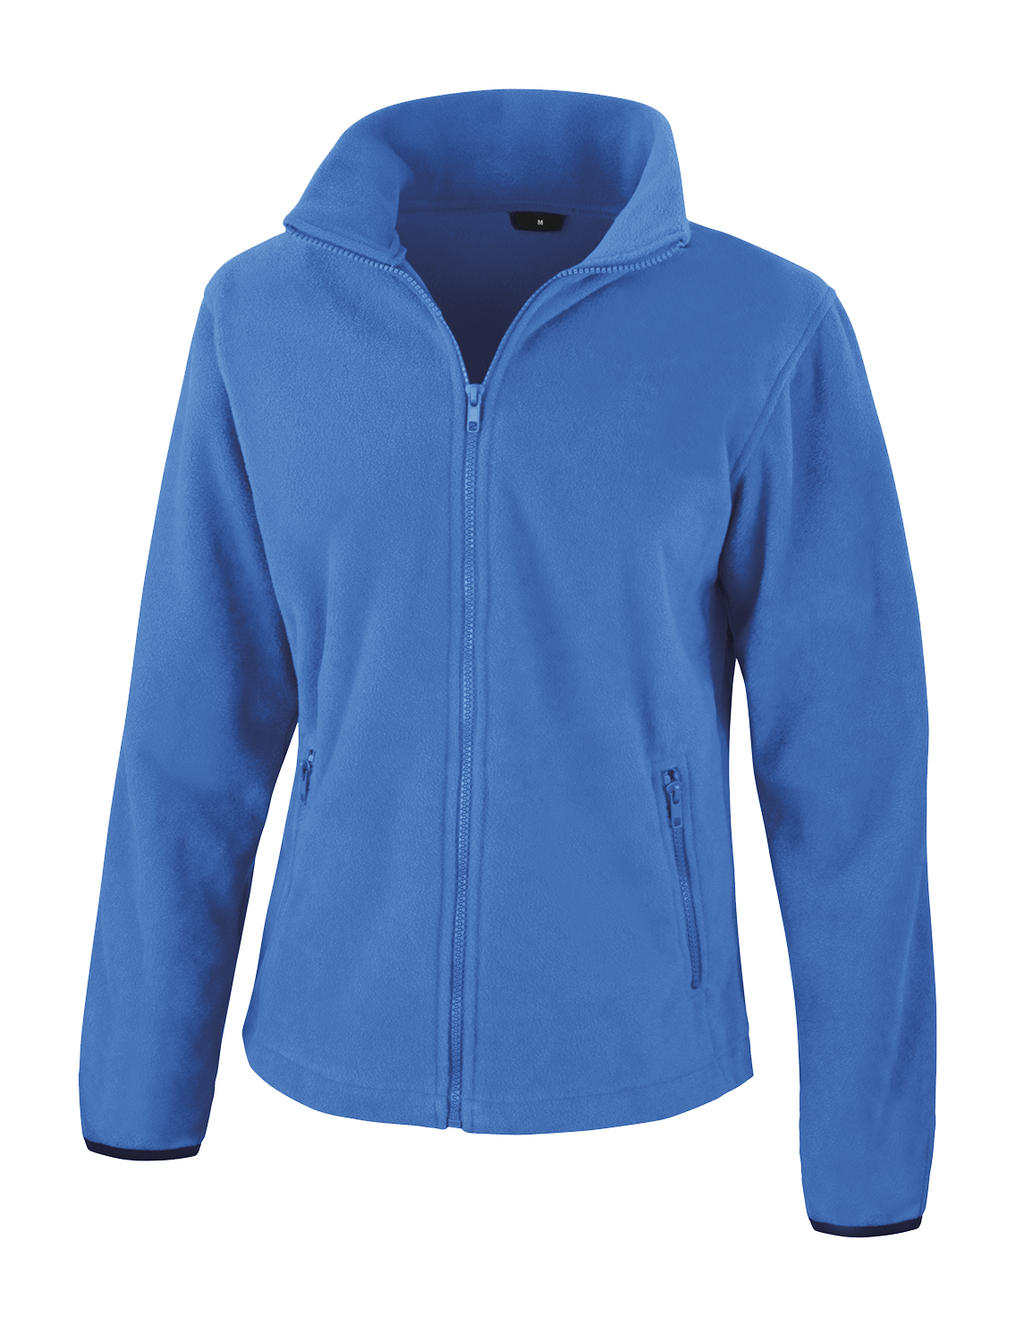  Womens Fashion Fit Outdoor Fleece in Farbe Electric Blue